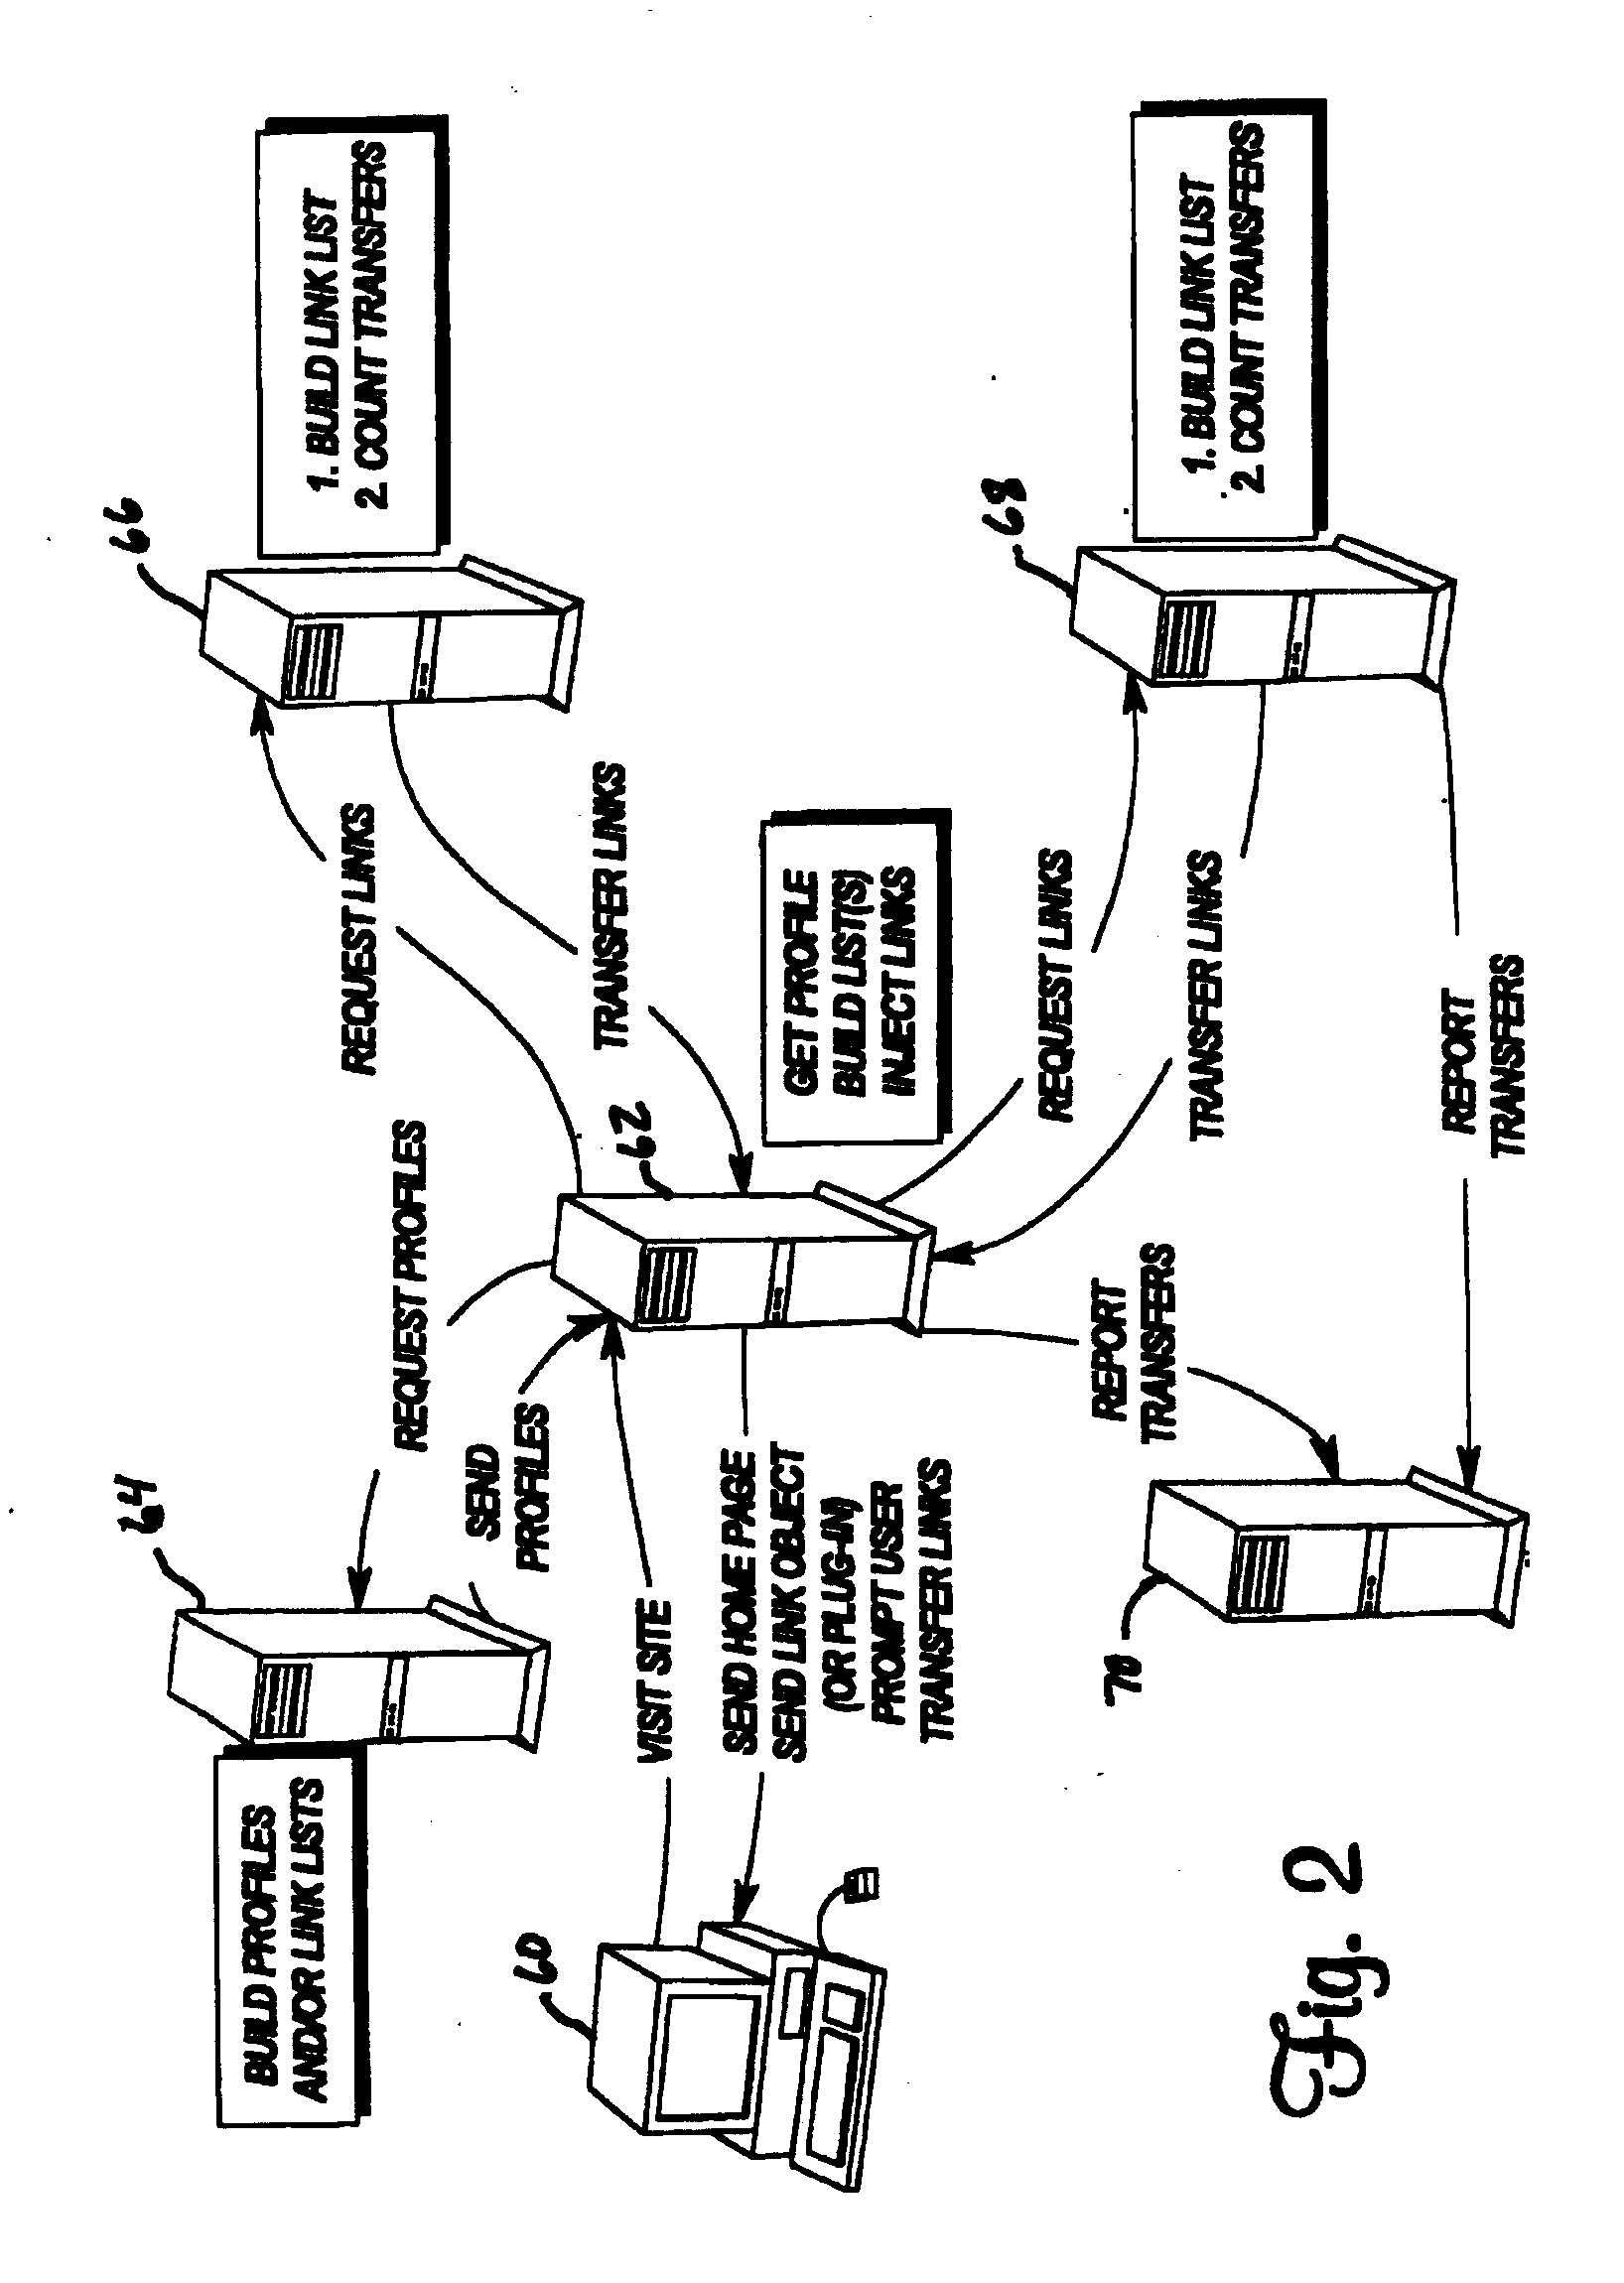 Link delivery for subsequent retrieval of networked information